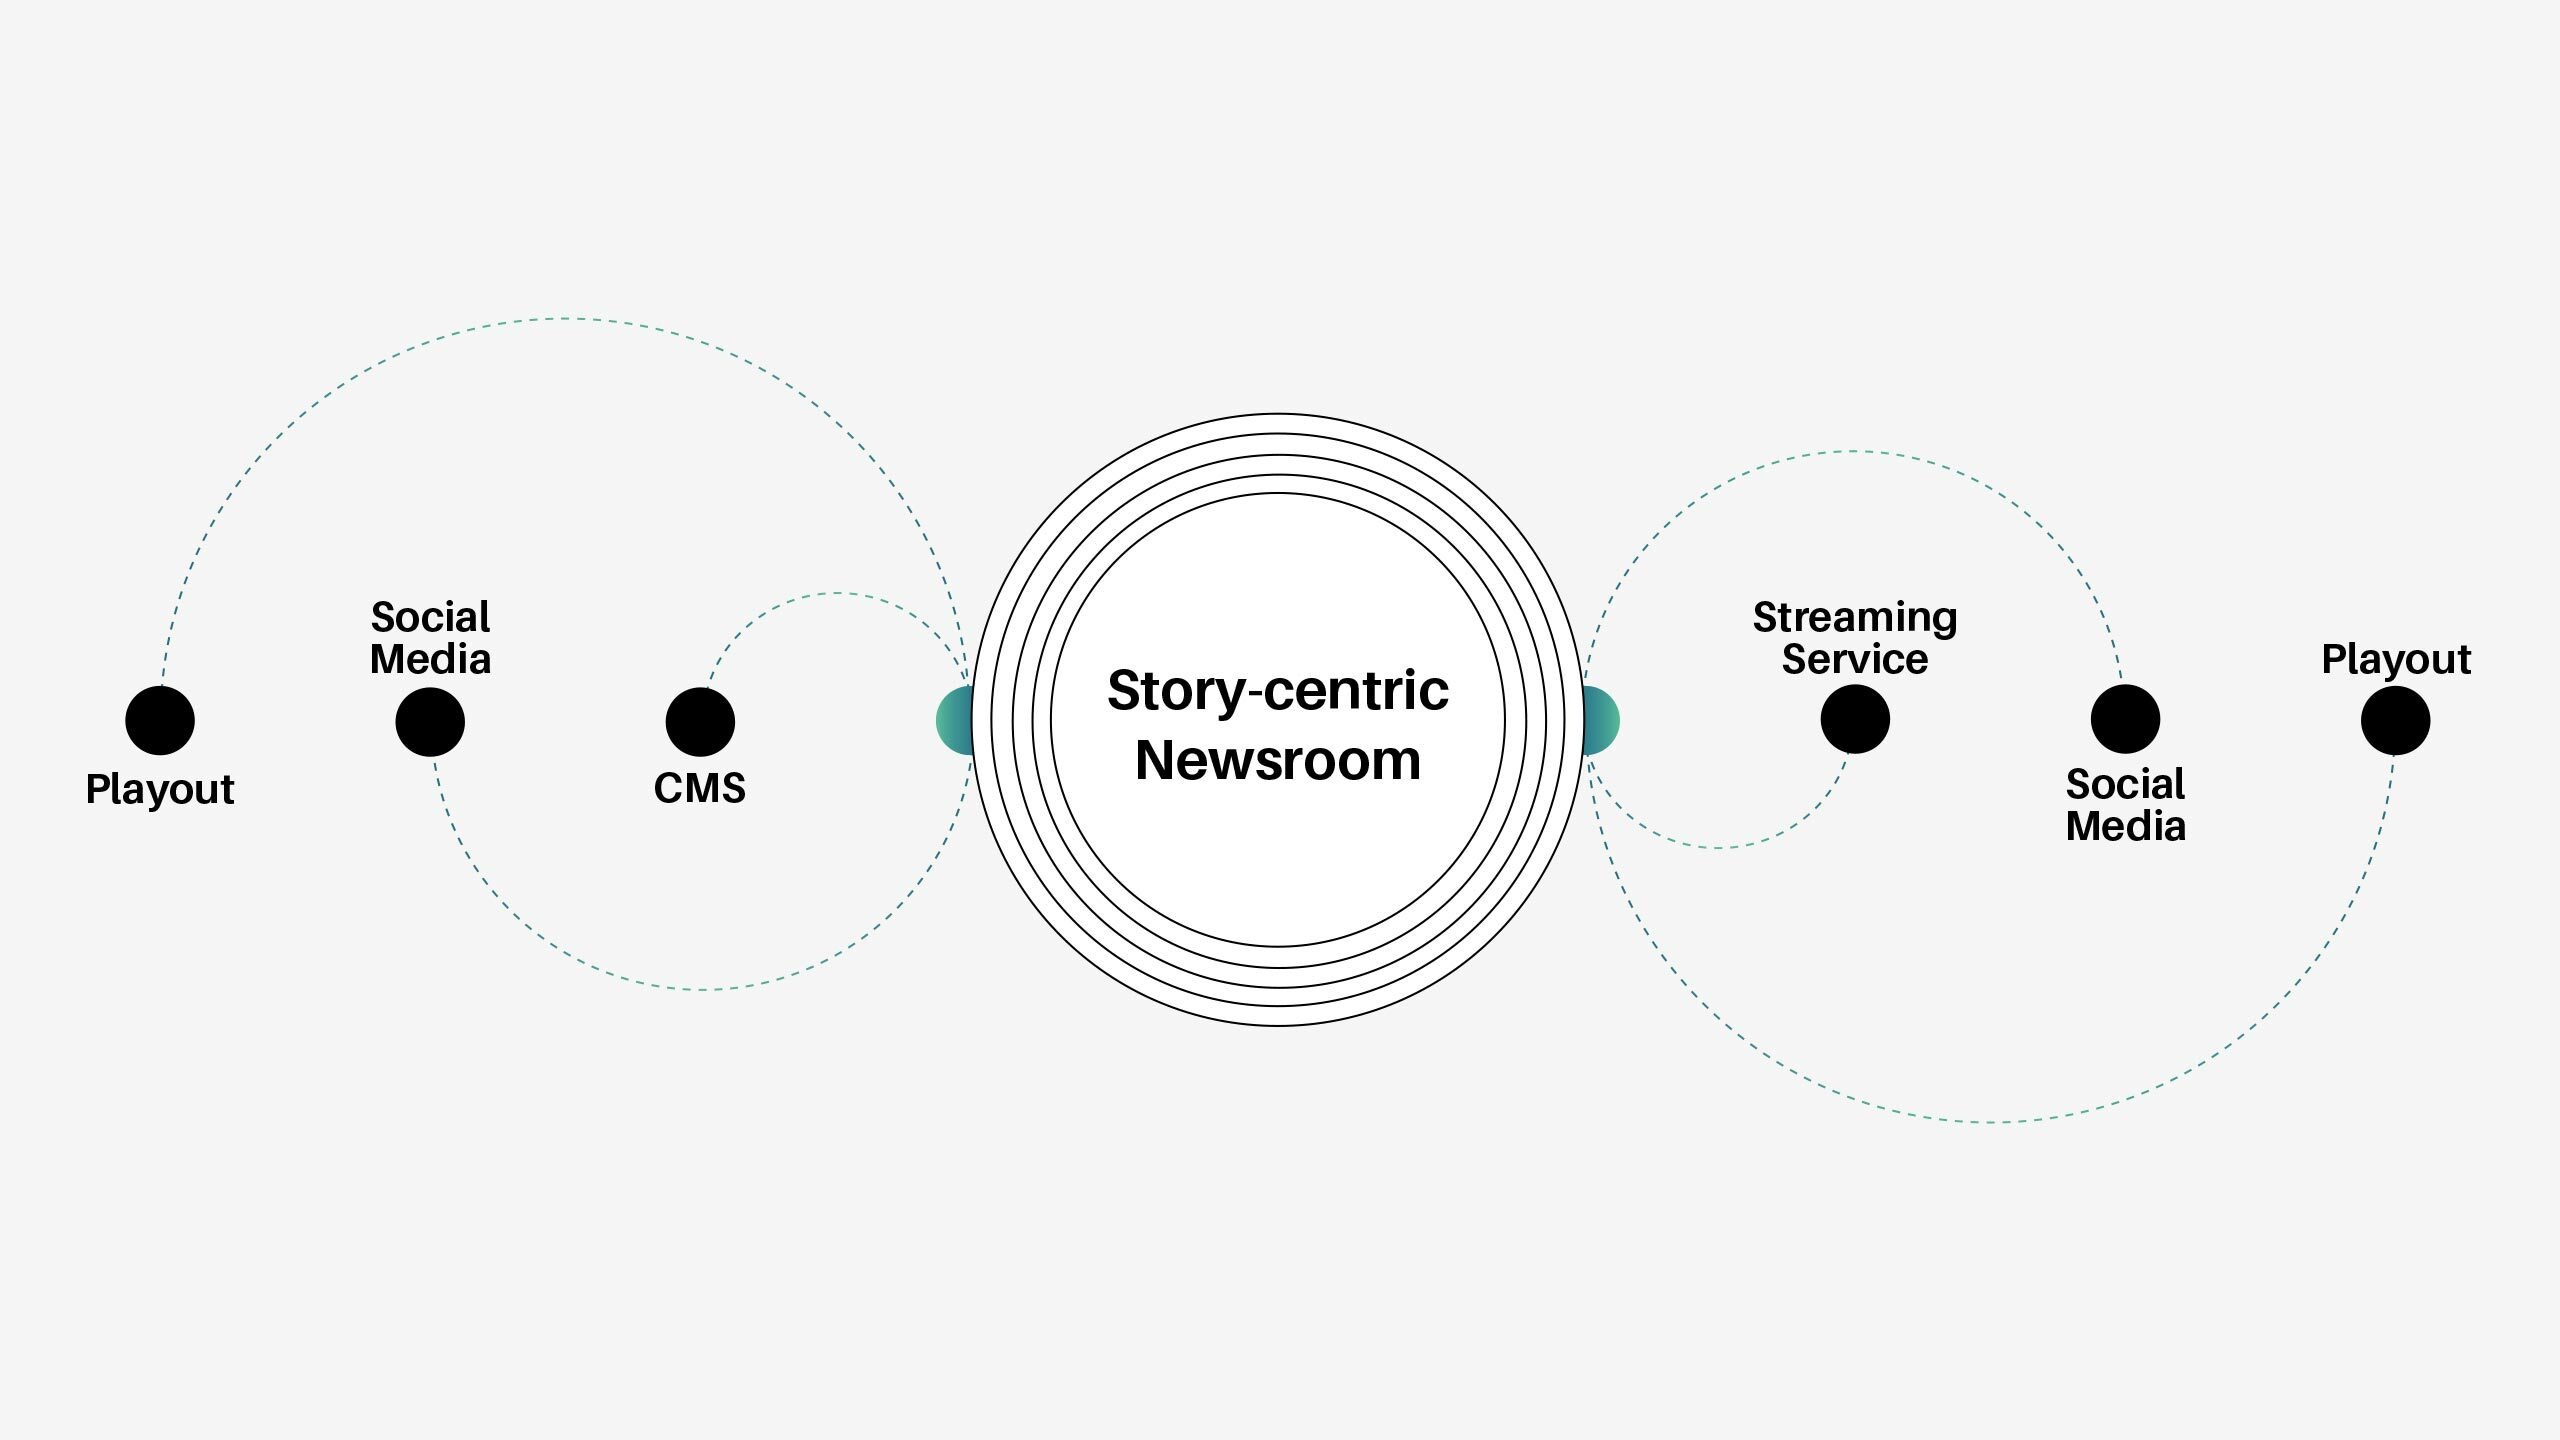 dina-story-diagram-10https://7mountains.com/ebook-the-principles-of-story-centric-workflows